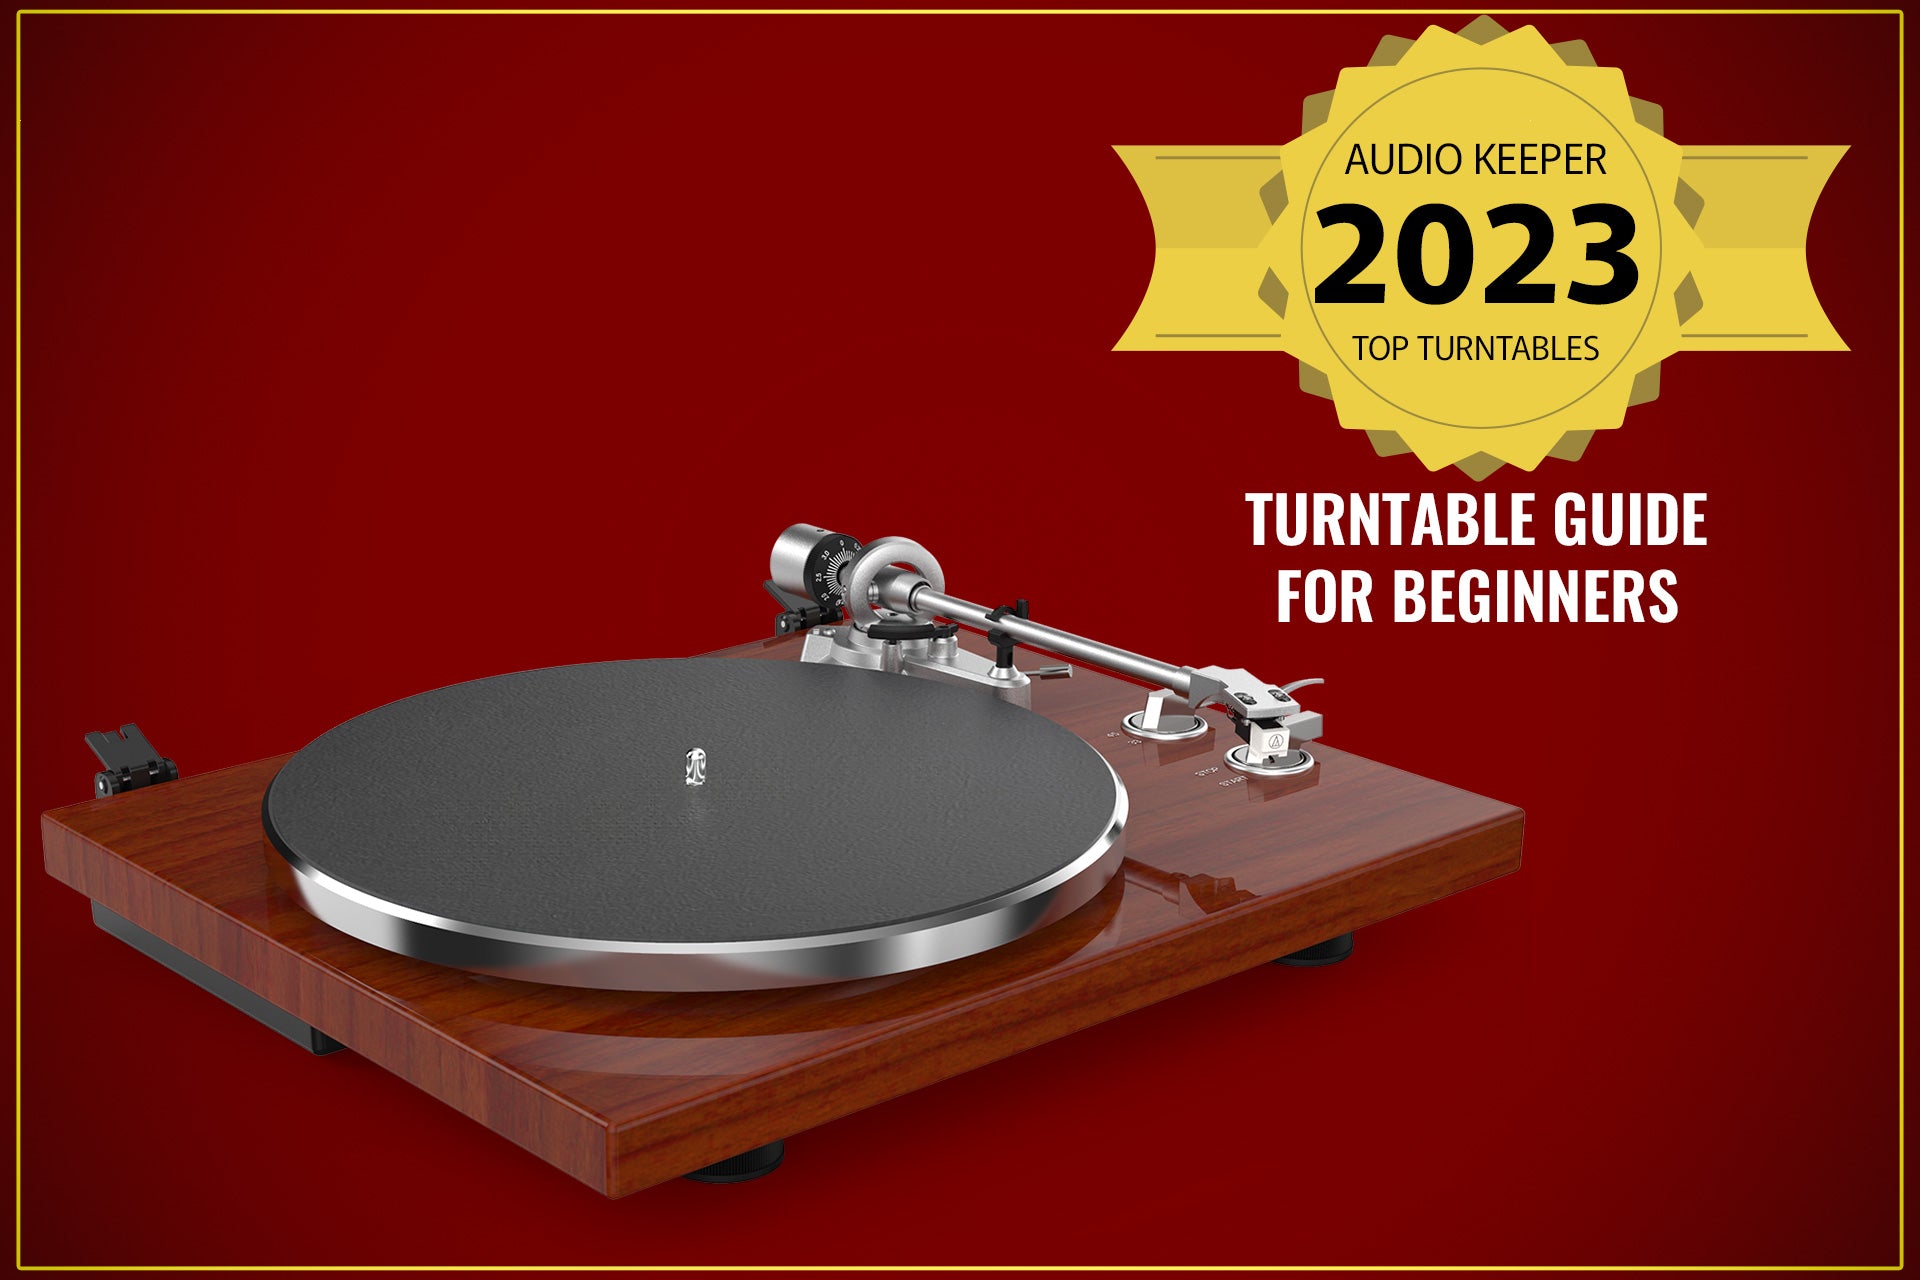 Turntable Buying Guide for Beginners